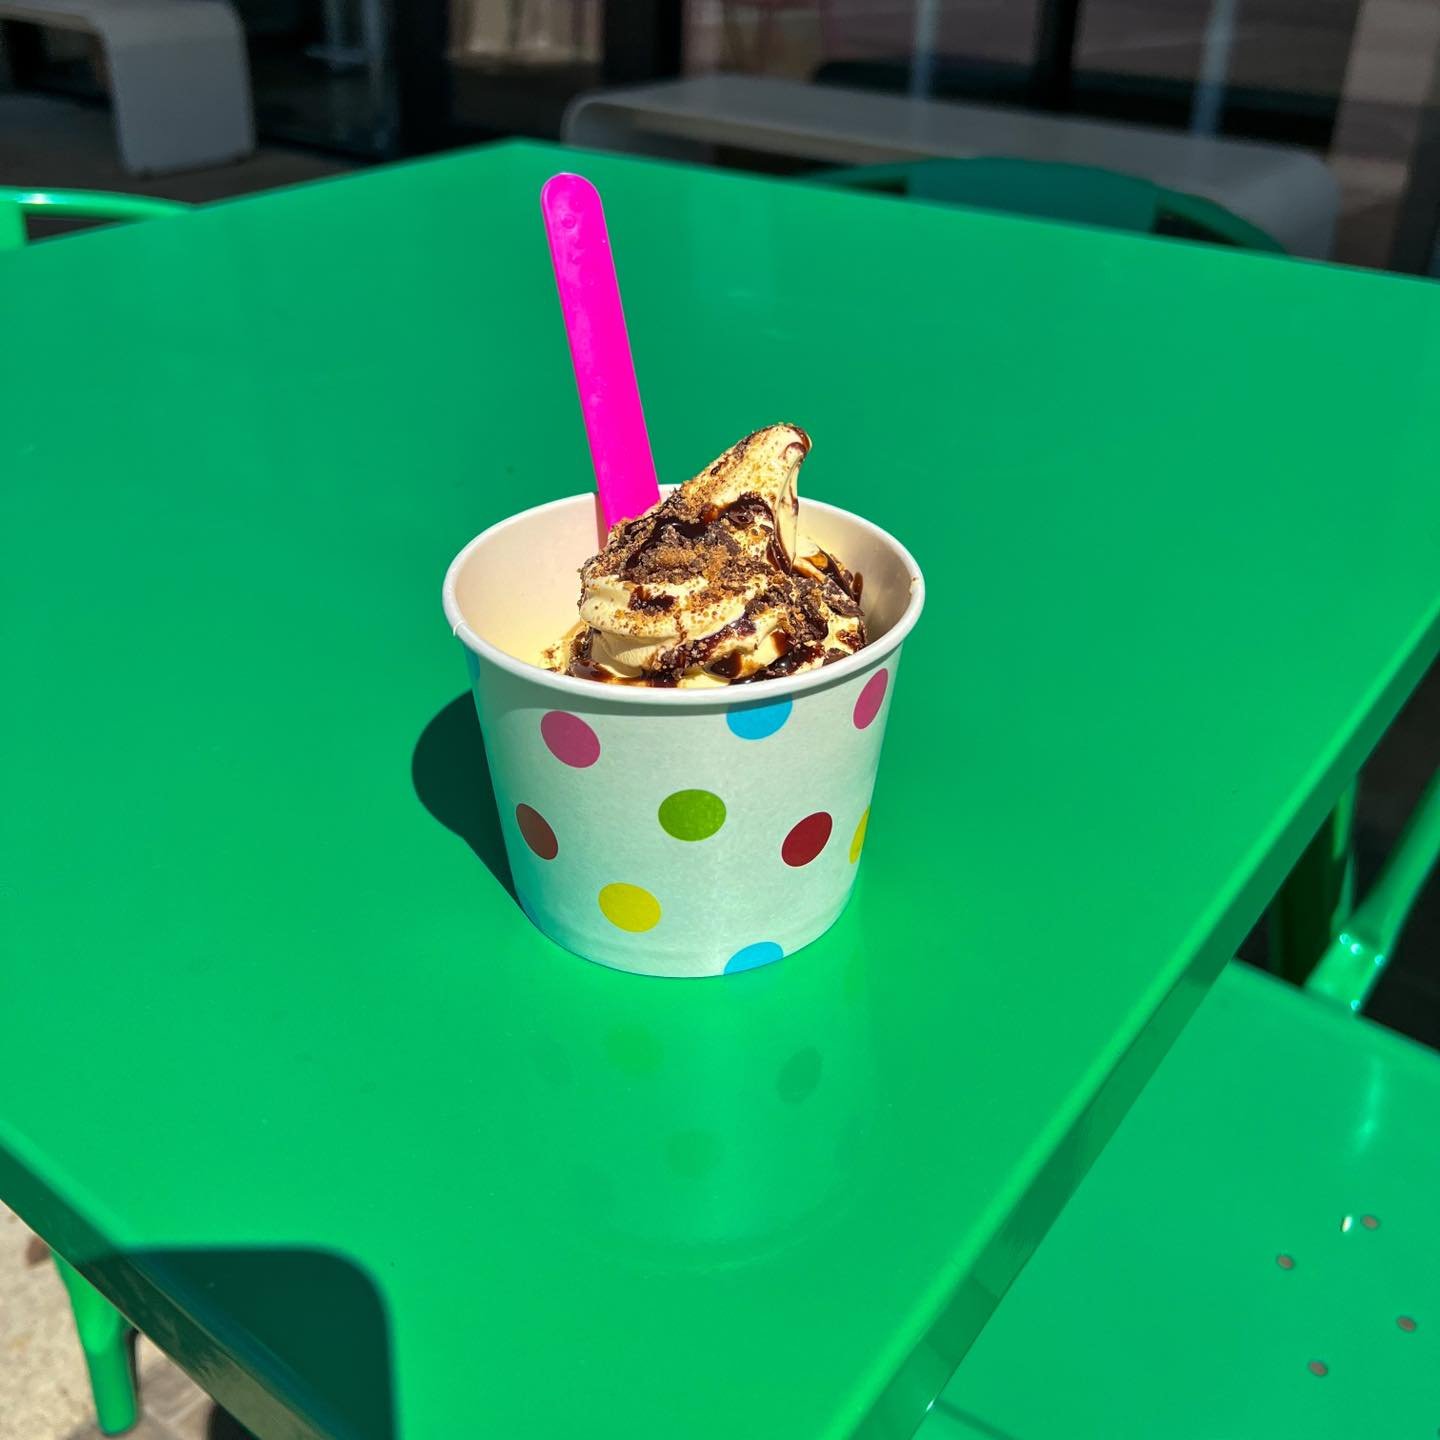 🍦 Brighten up your Tax Day! Drop by and treat yourself to your favorite froyo flavors. Sometimes, a little sweetness is all you need to change the day&rsquo;s tune! 🎵🌈

👉 Come in and create your perfect cup. Happiness is just a swirl away!

#TaxD